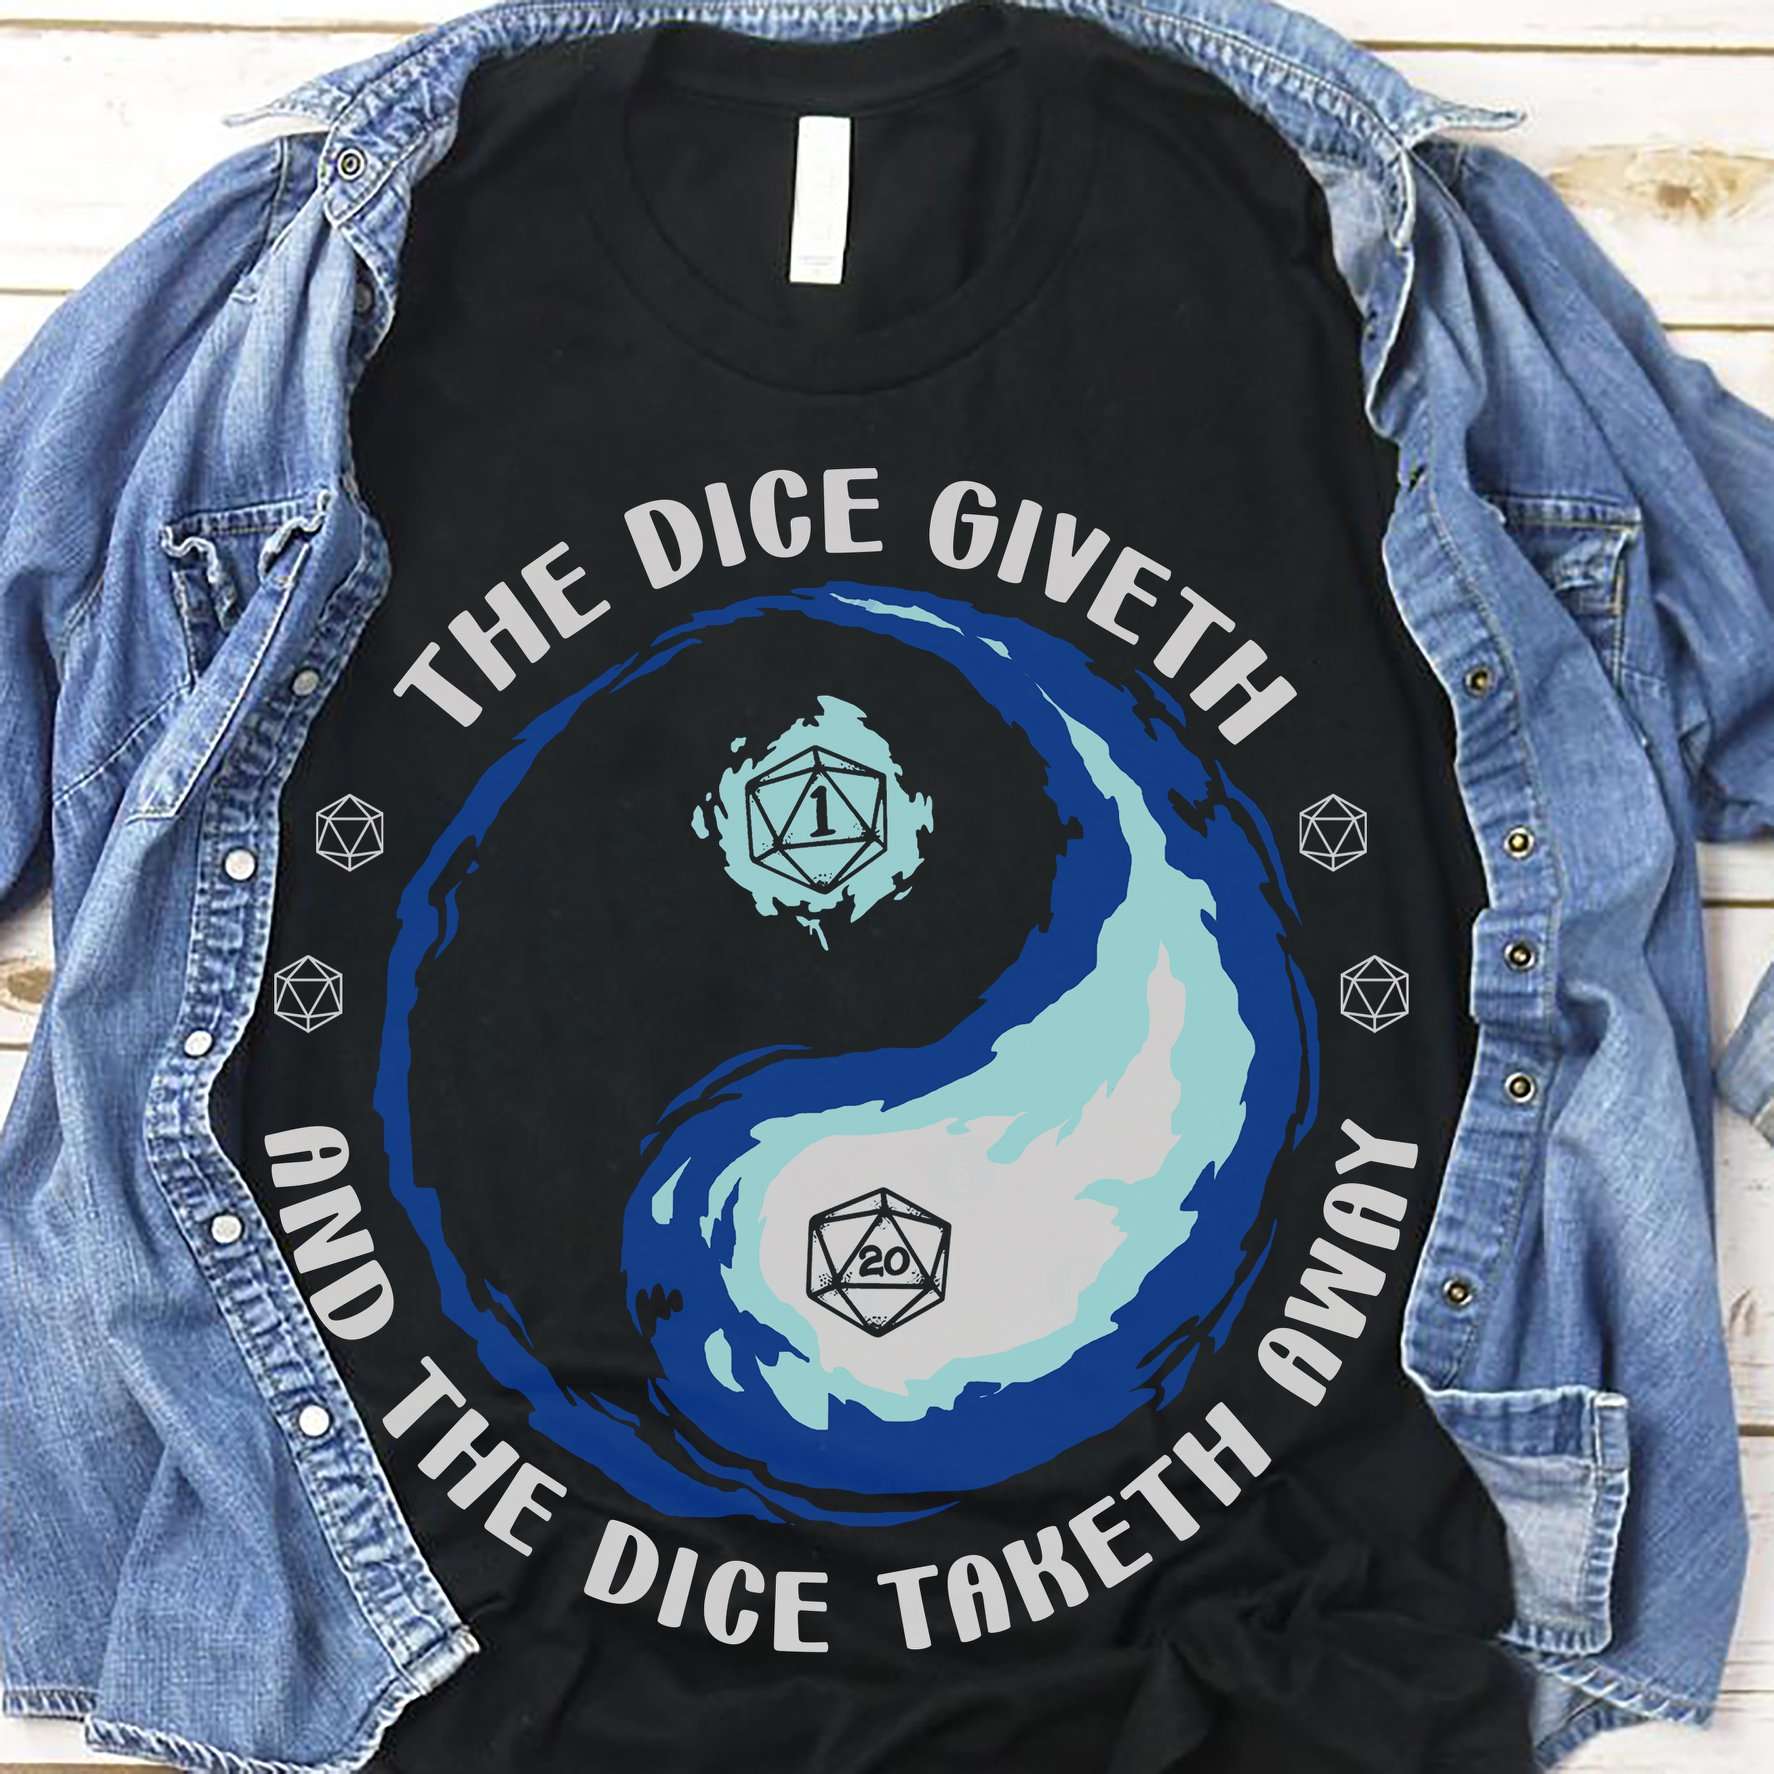 Dice Extremes - The dice giveth and the dice taketh away